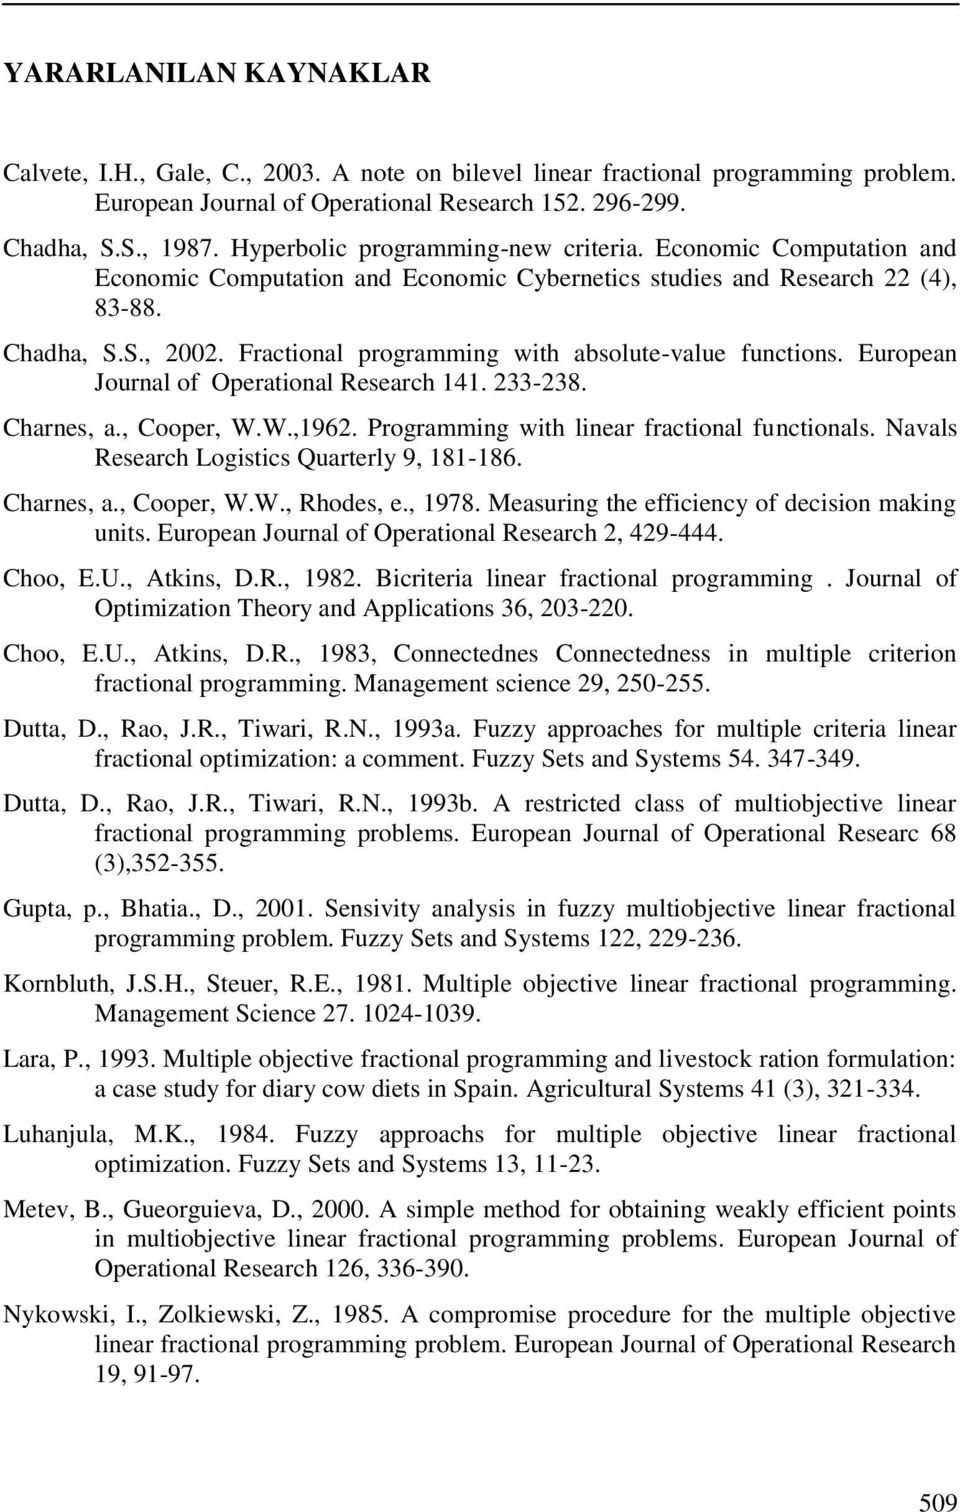 , Cooper, W.W.,96. Programmg wth lear fractoal fuctoals. Navals Research Logstcs Quarterl 9, 8-86. Chares, a., Cooper, W.W., Rhoes, e., 978. Measurg the effcec of ecso makg uts.